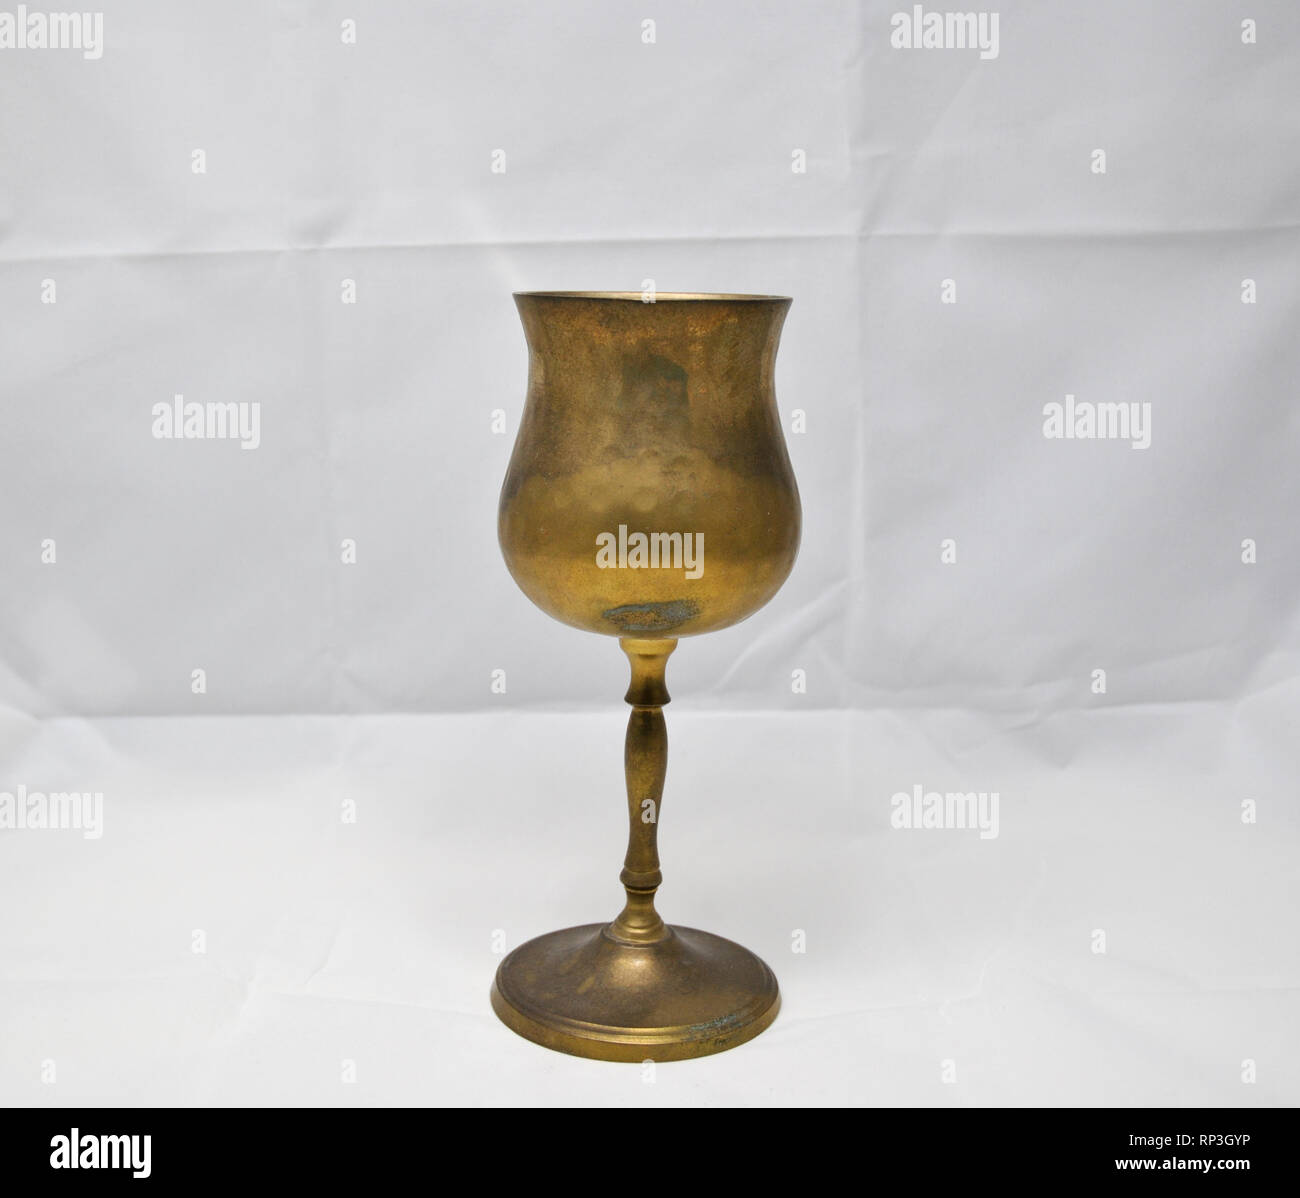 A brass wine cup against a white background Stock Photo